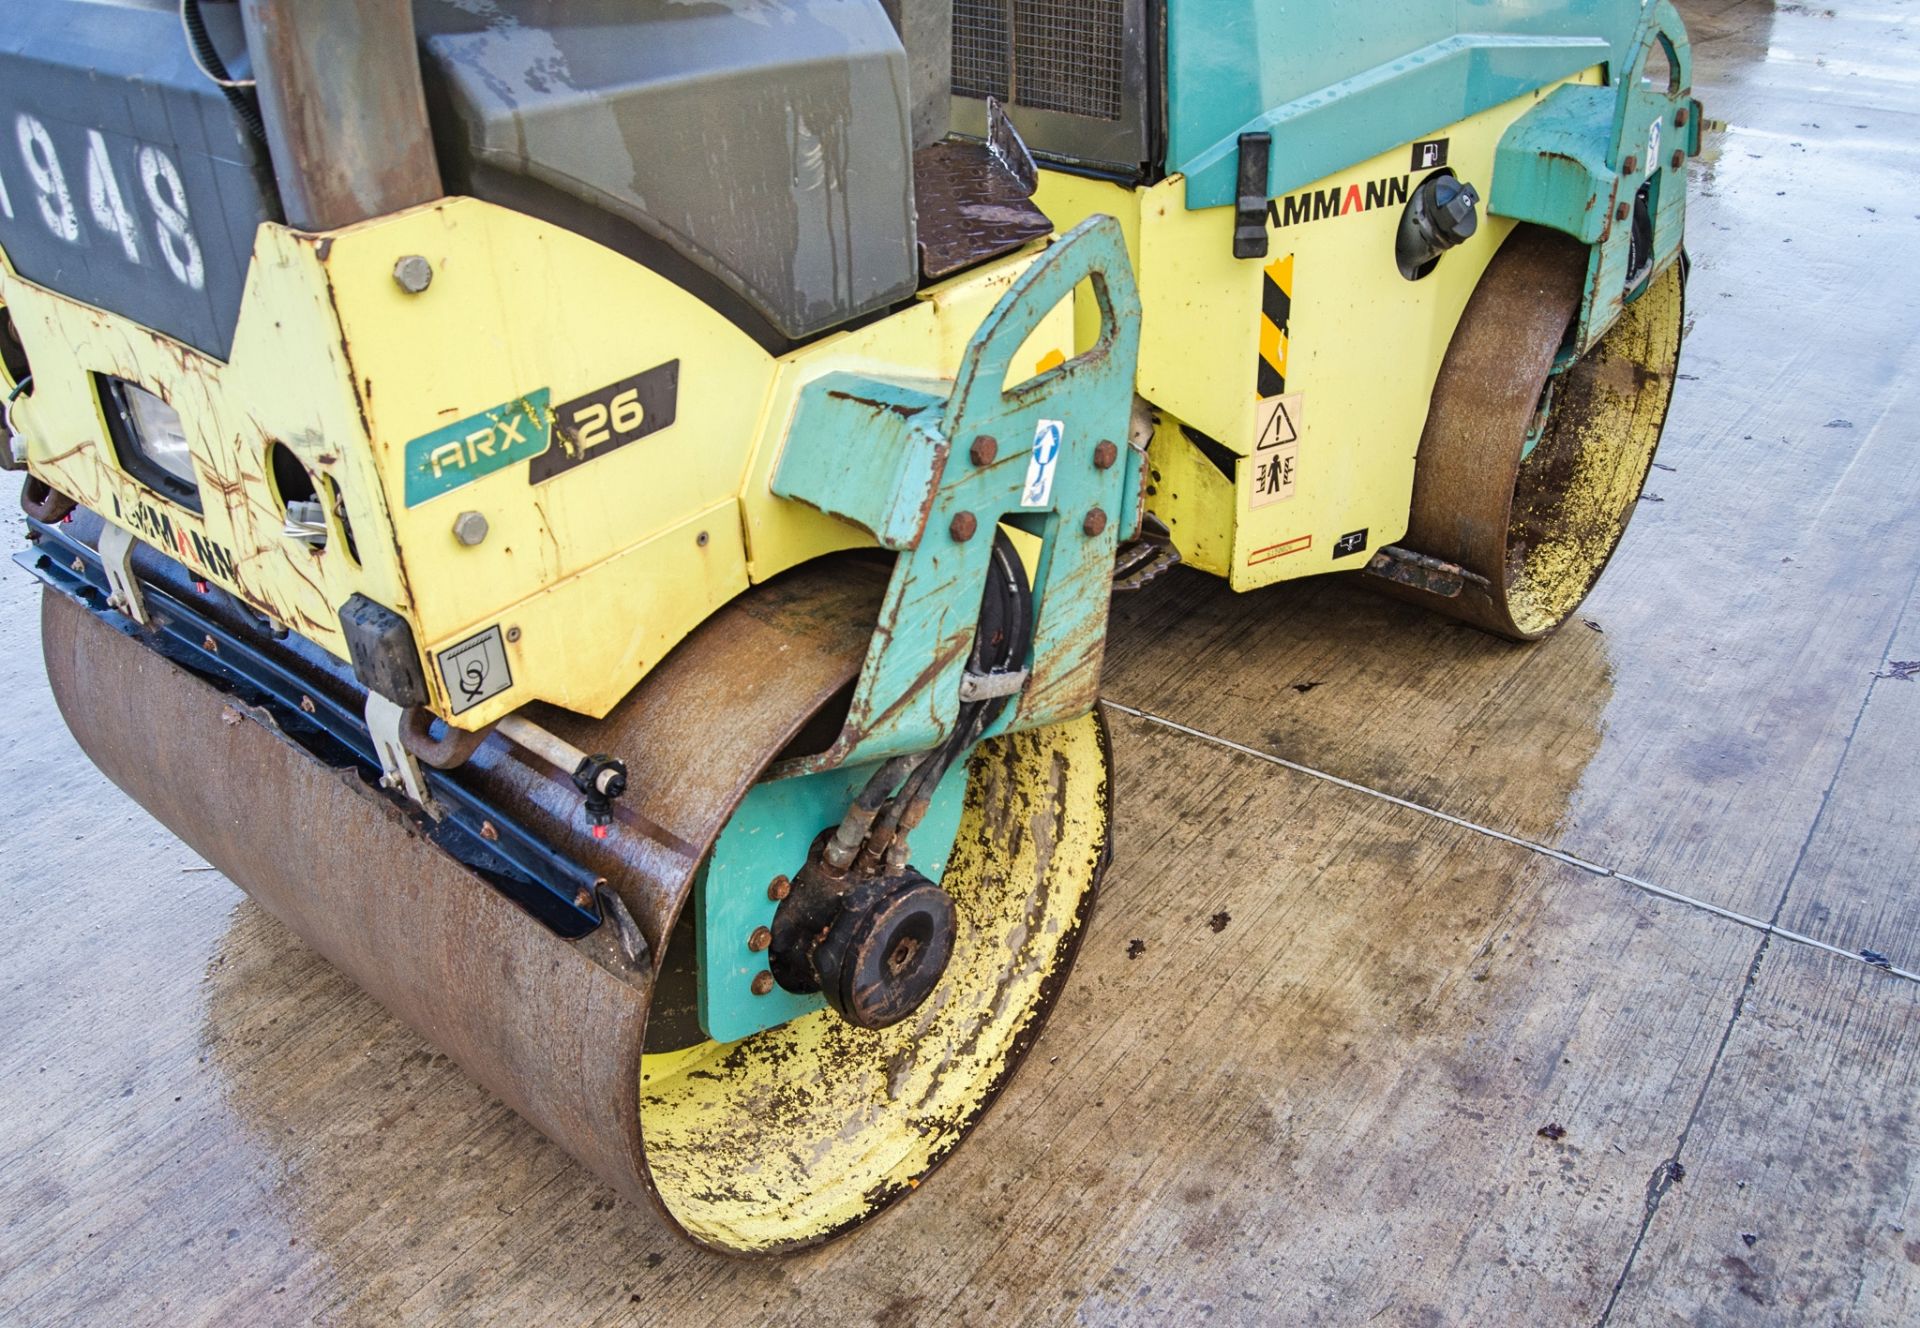 Ammann ARX26 double drum ride on roller Year: 2015 S/N: 6150026 Recorded Hours: 1351 1948 - Image 10 of 20